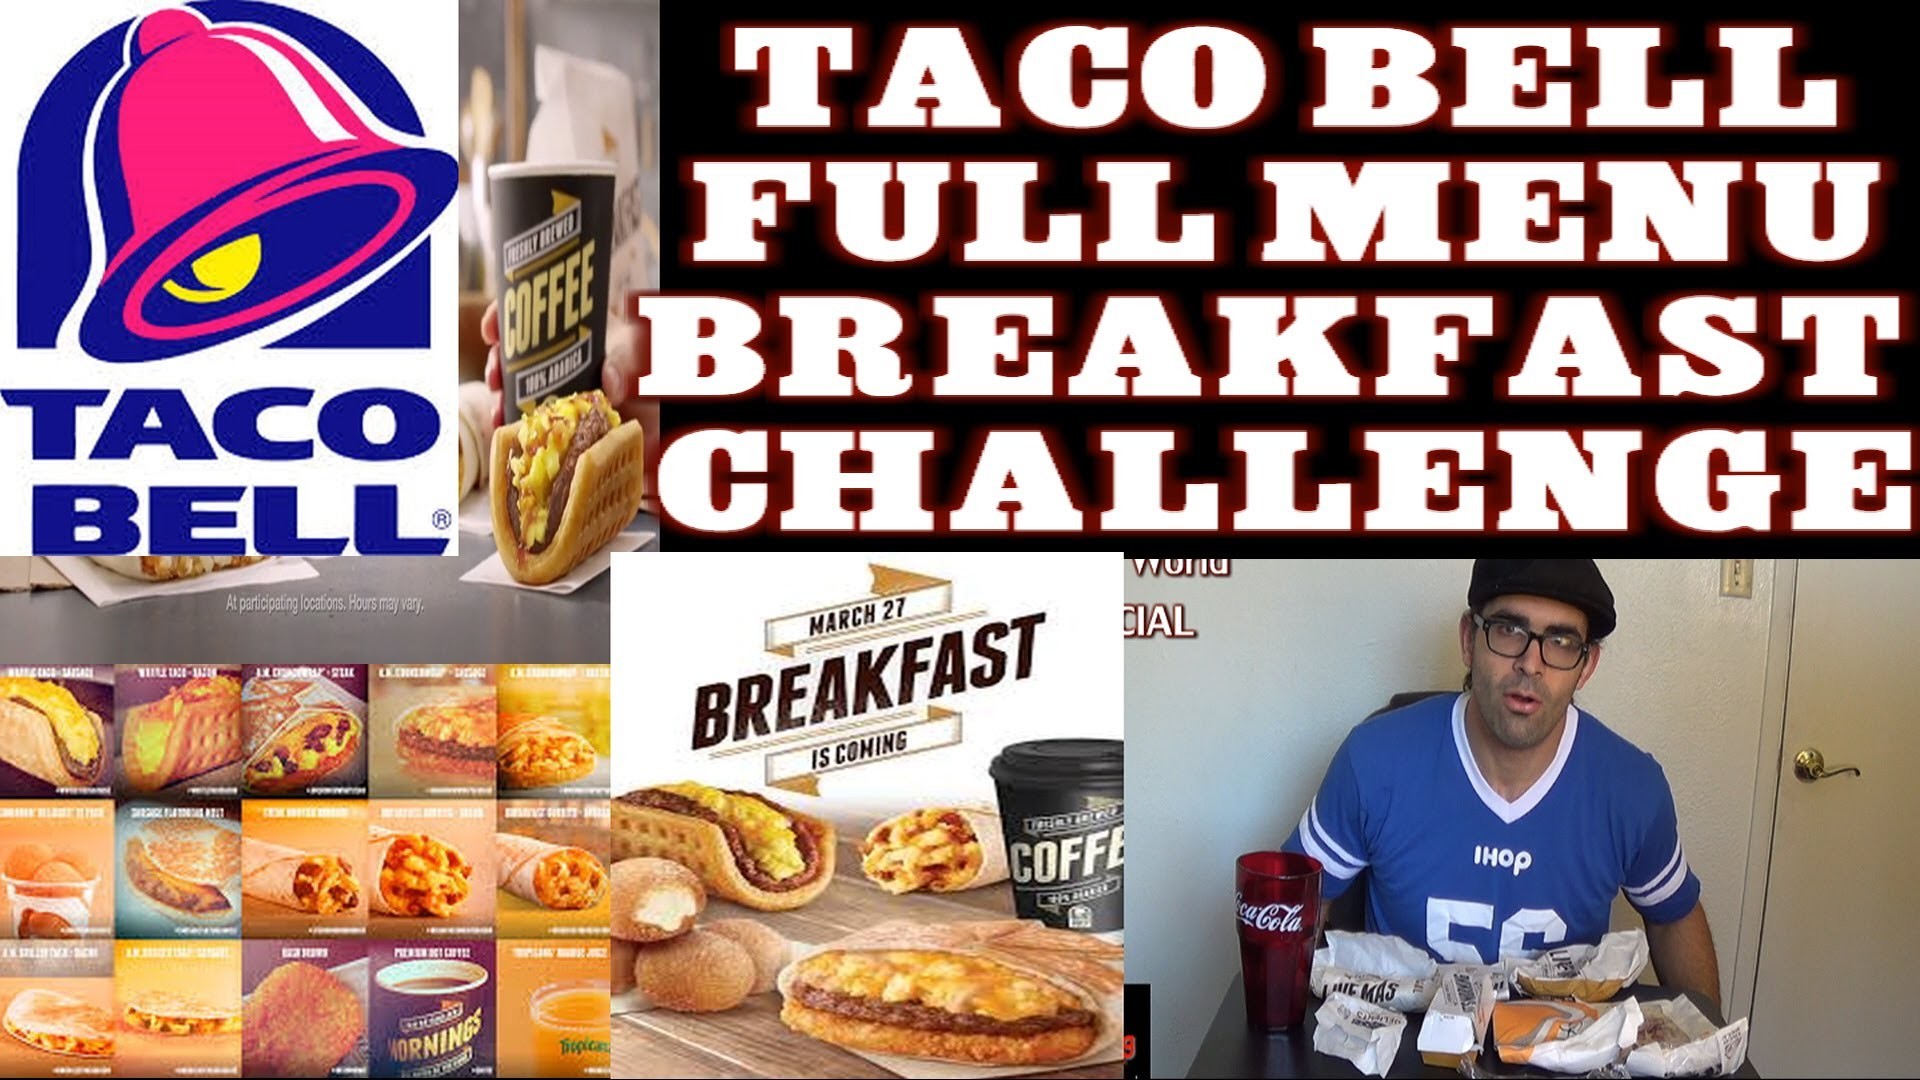 1920x1080 Taco Bell Full Breakfast Menu Challenge (vs the world special) - YouTube